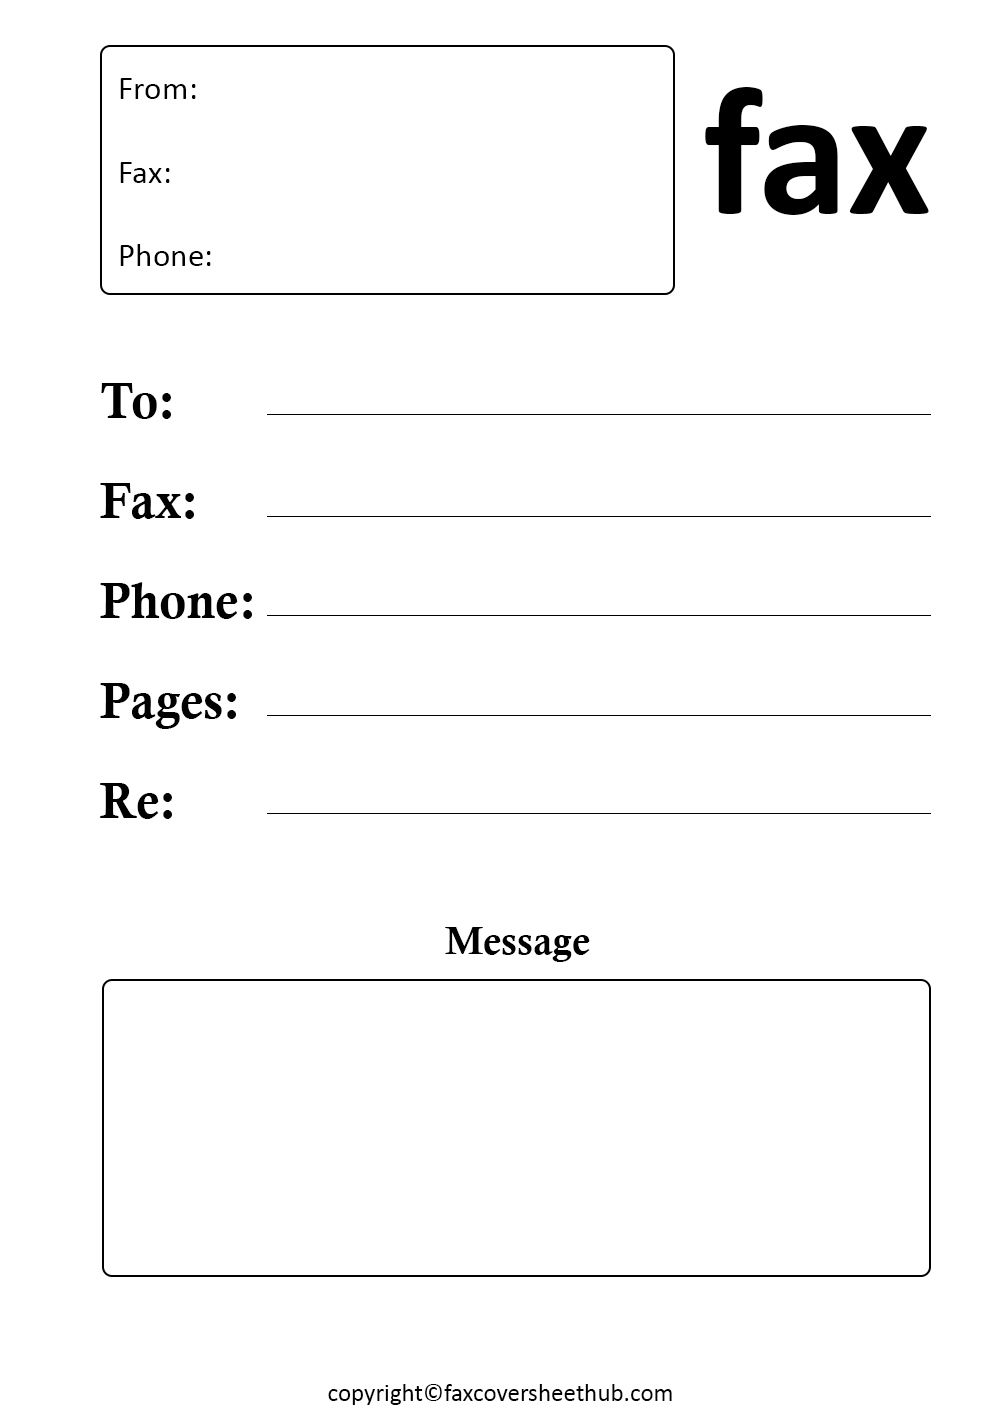 How to fill out Fax Cover Sheet